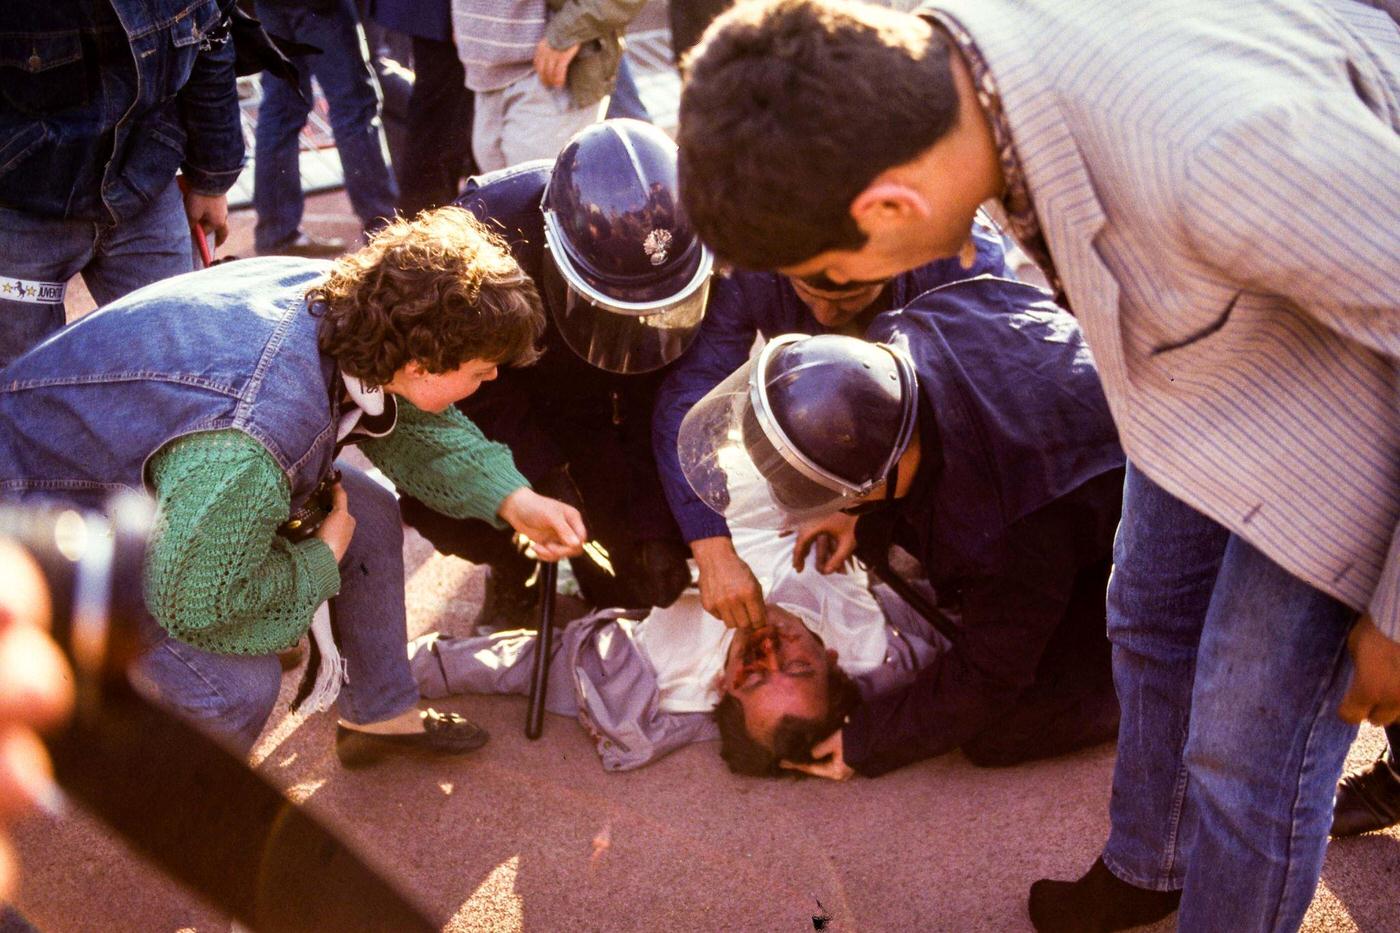 Supporter receives first aid by security police at Heysel Stadium, European Cup Final, 1985.